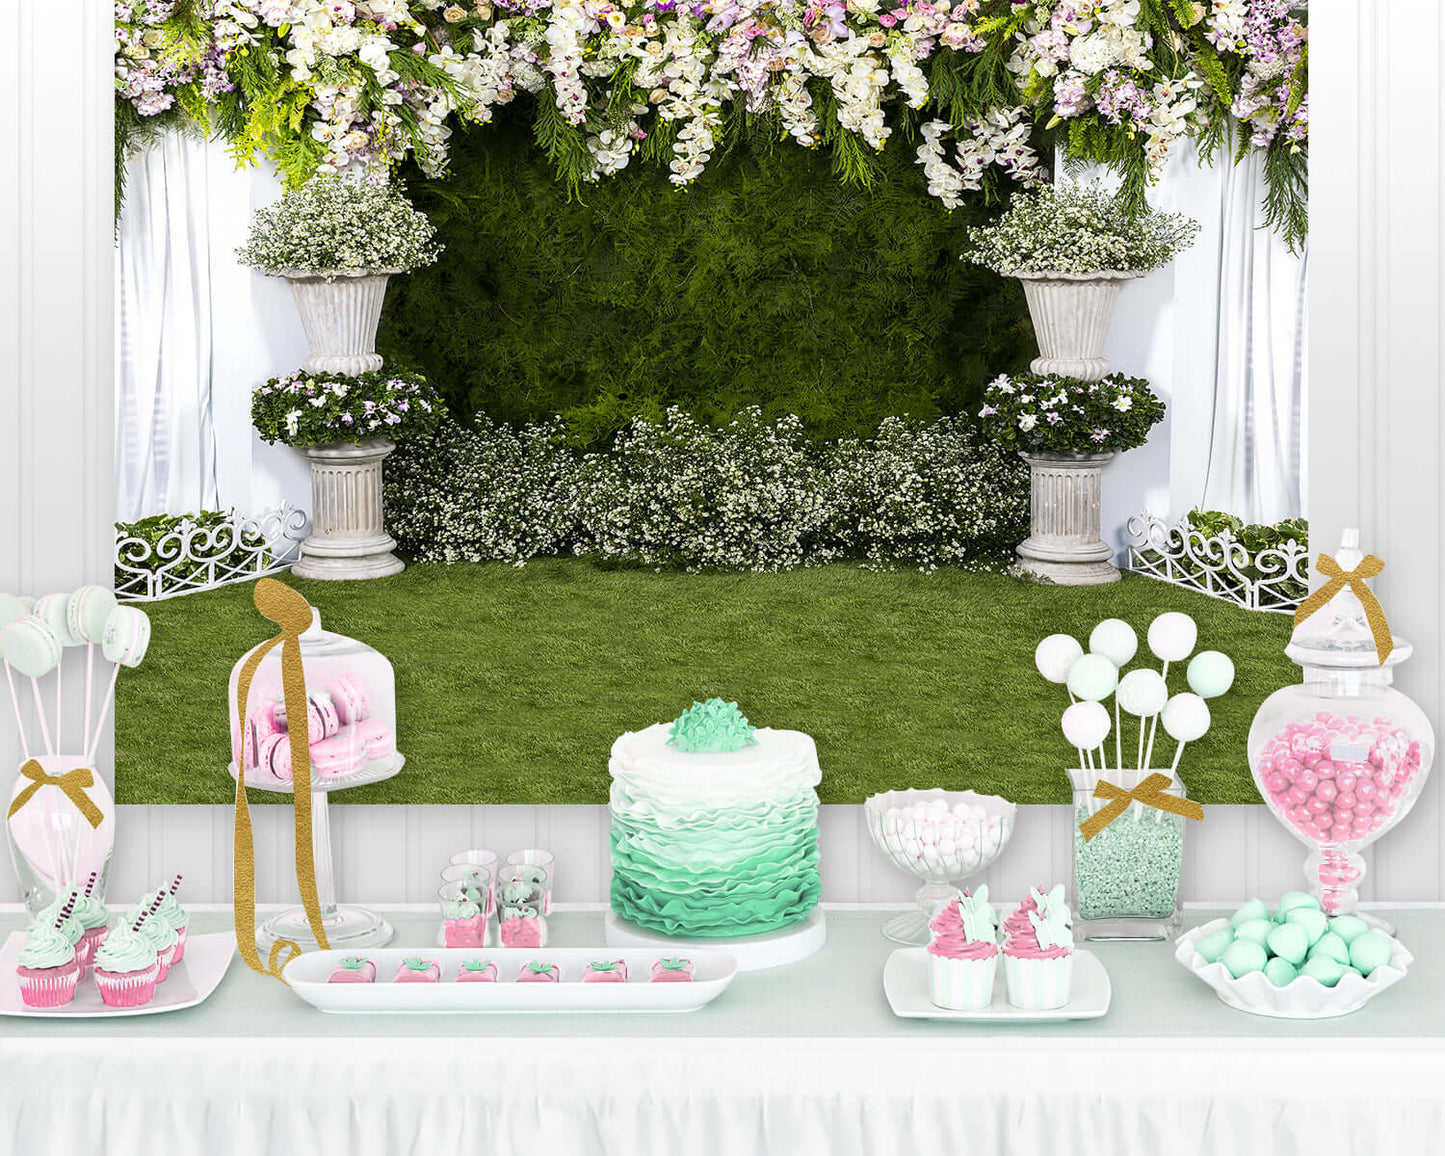 Wedding Flowers Backdrop Photography Background Floral White Curtain Green Ivy Wall Decoration Outdoos Ceremony Green Grassfield Backdrops